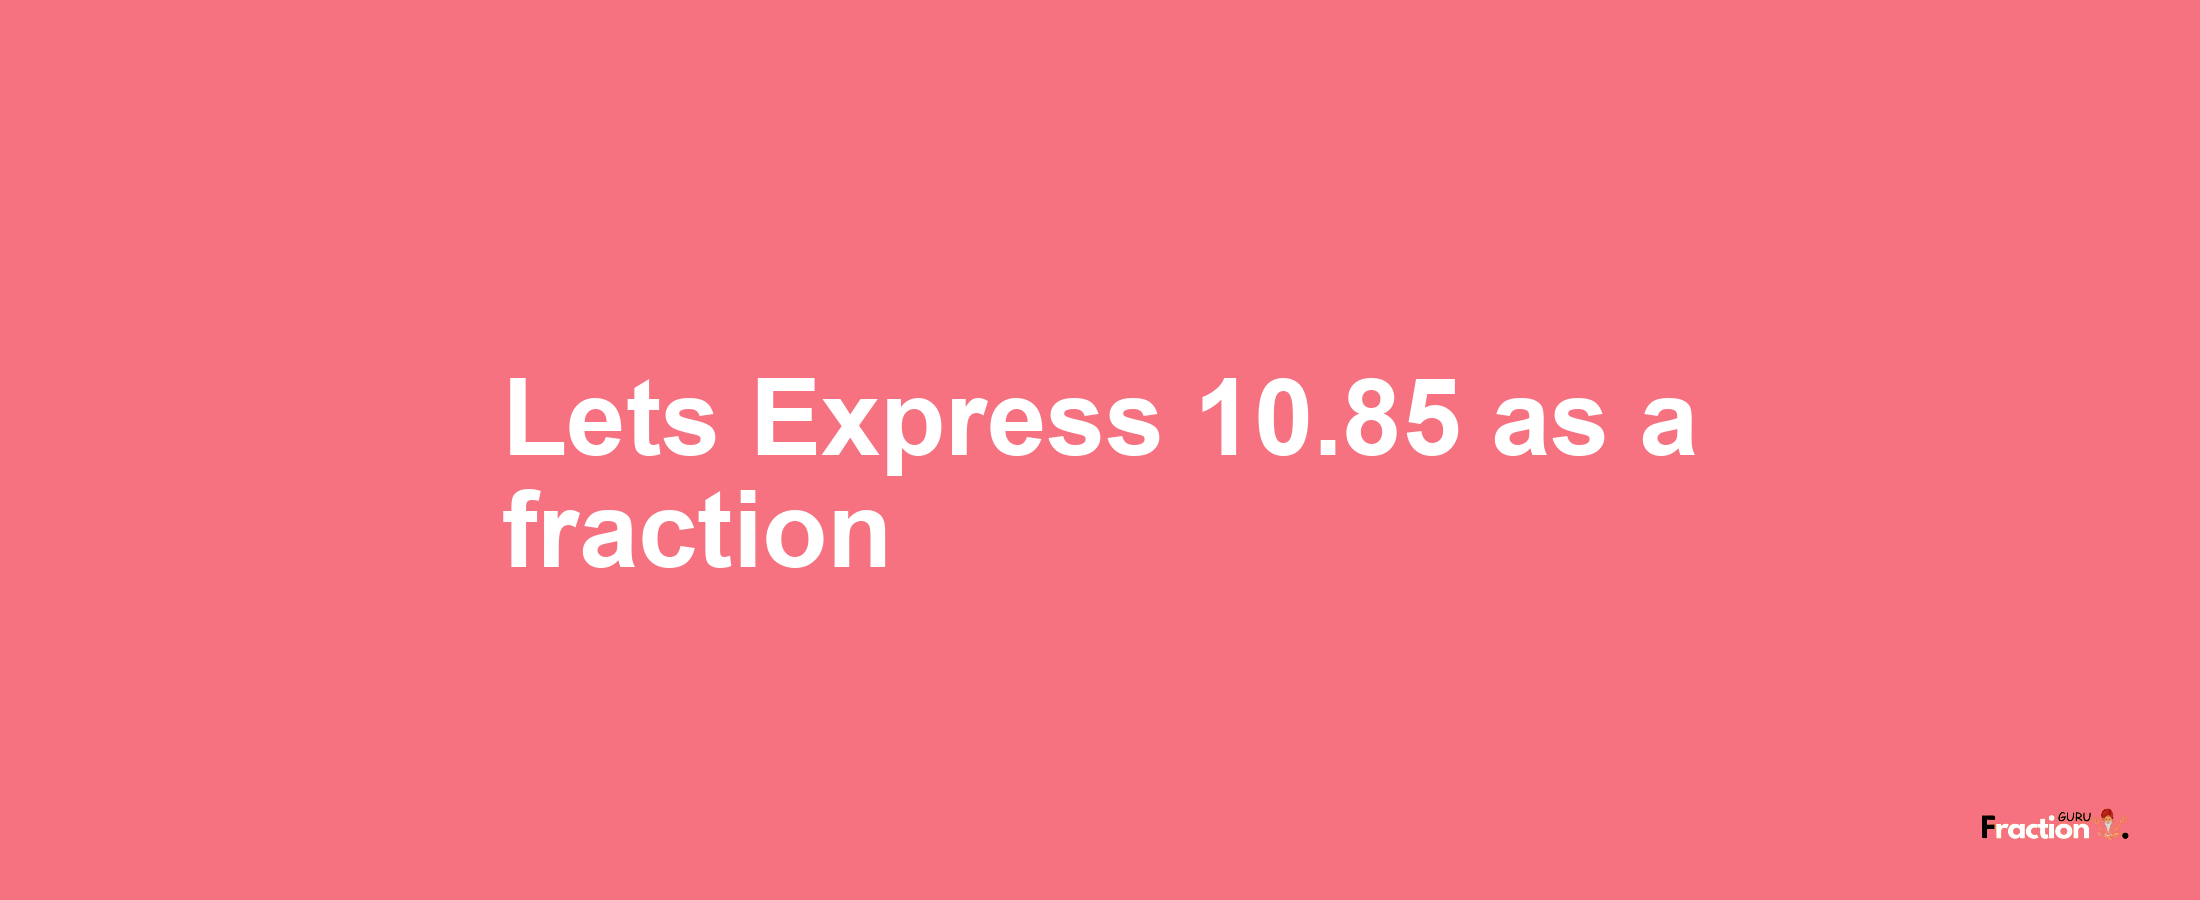 Lets Express 10.85 as afraction